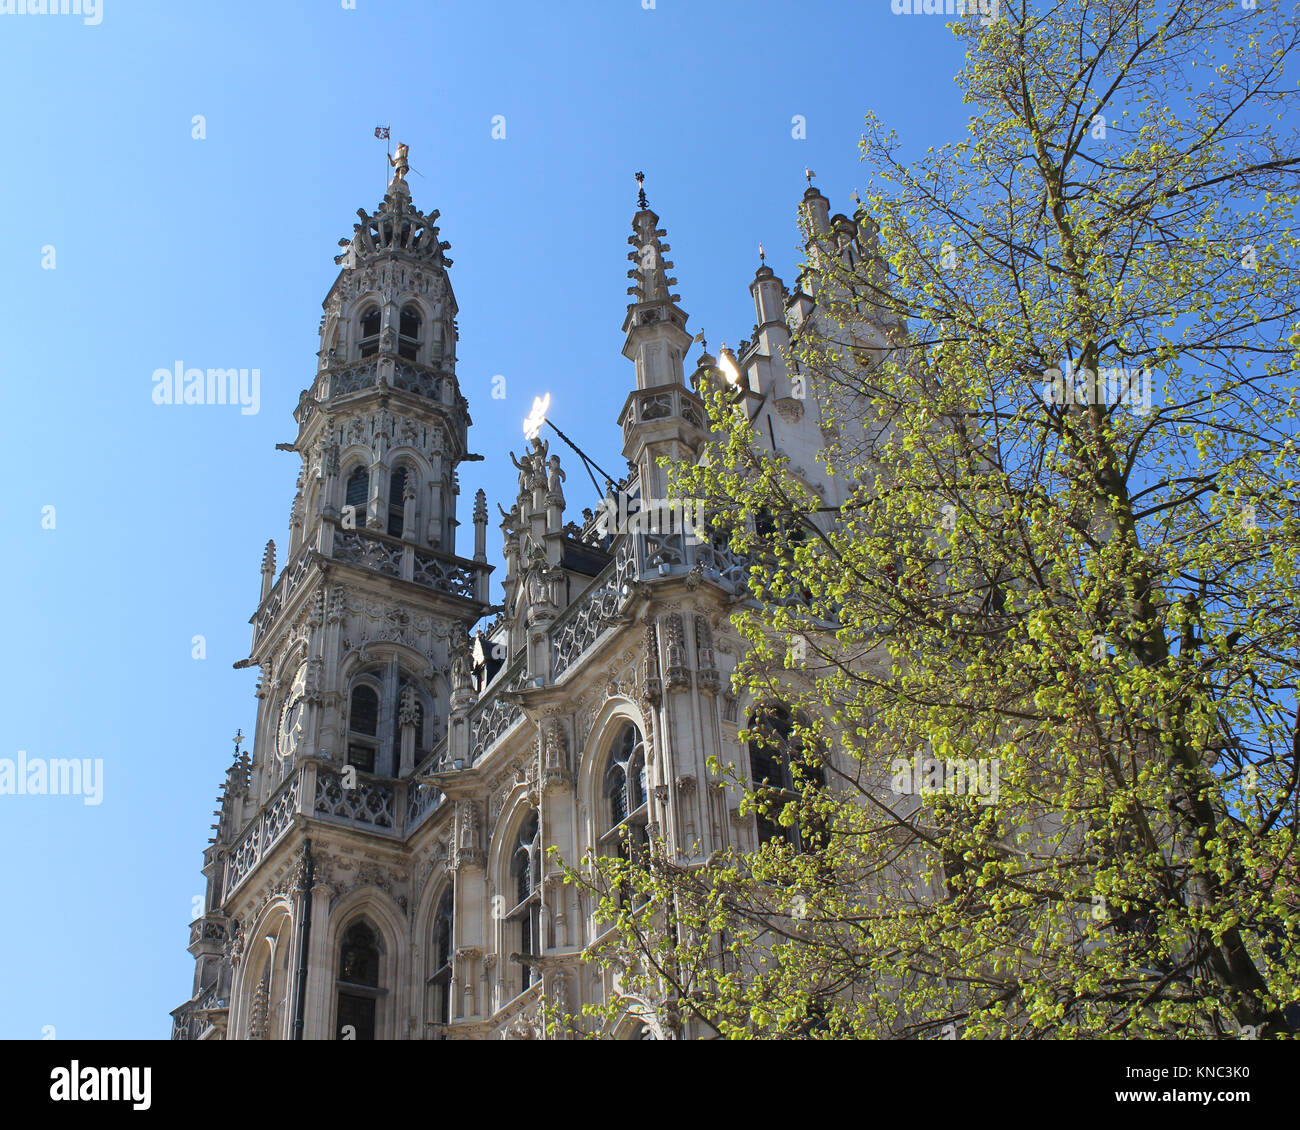 The beautiful 14th century, late gothic style Oudenaarde Town Hall, in East Flanders in Belgium. Against a background of blue sky in the spring. Stock Photo